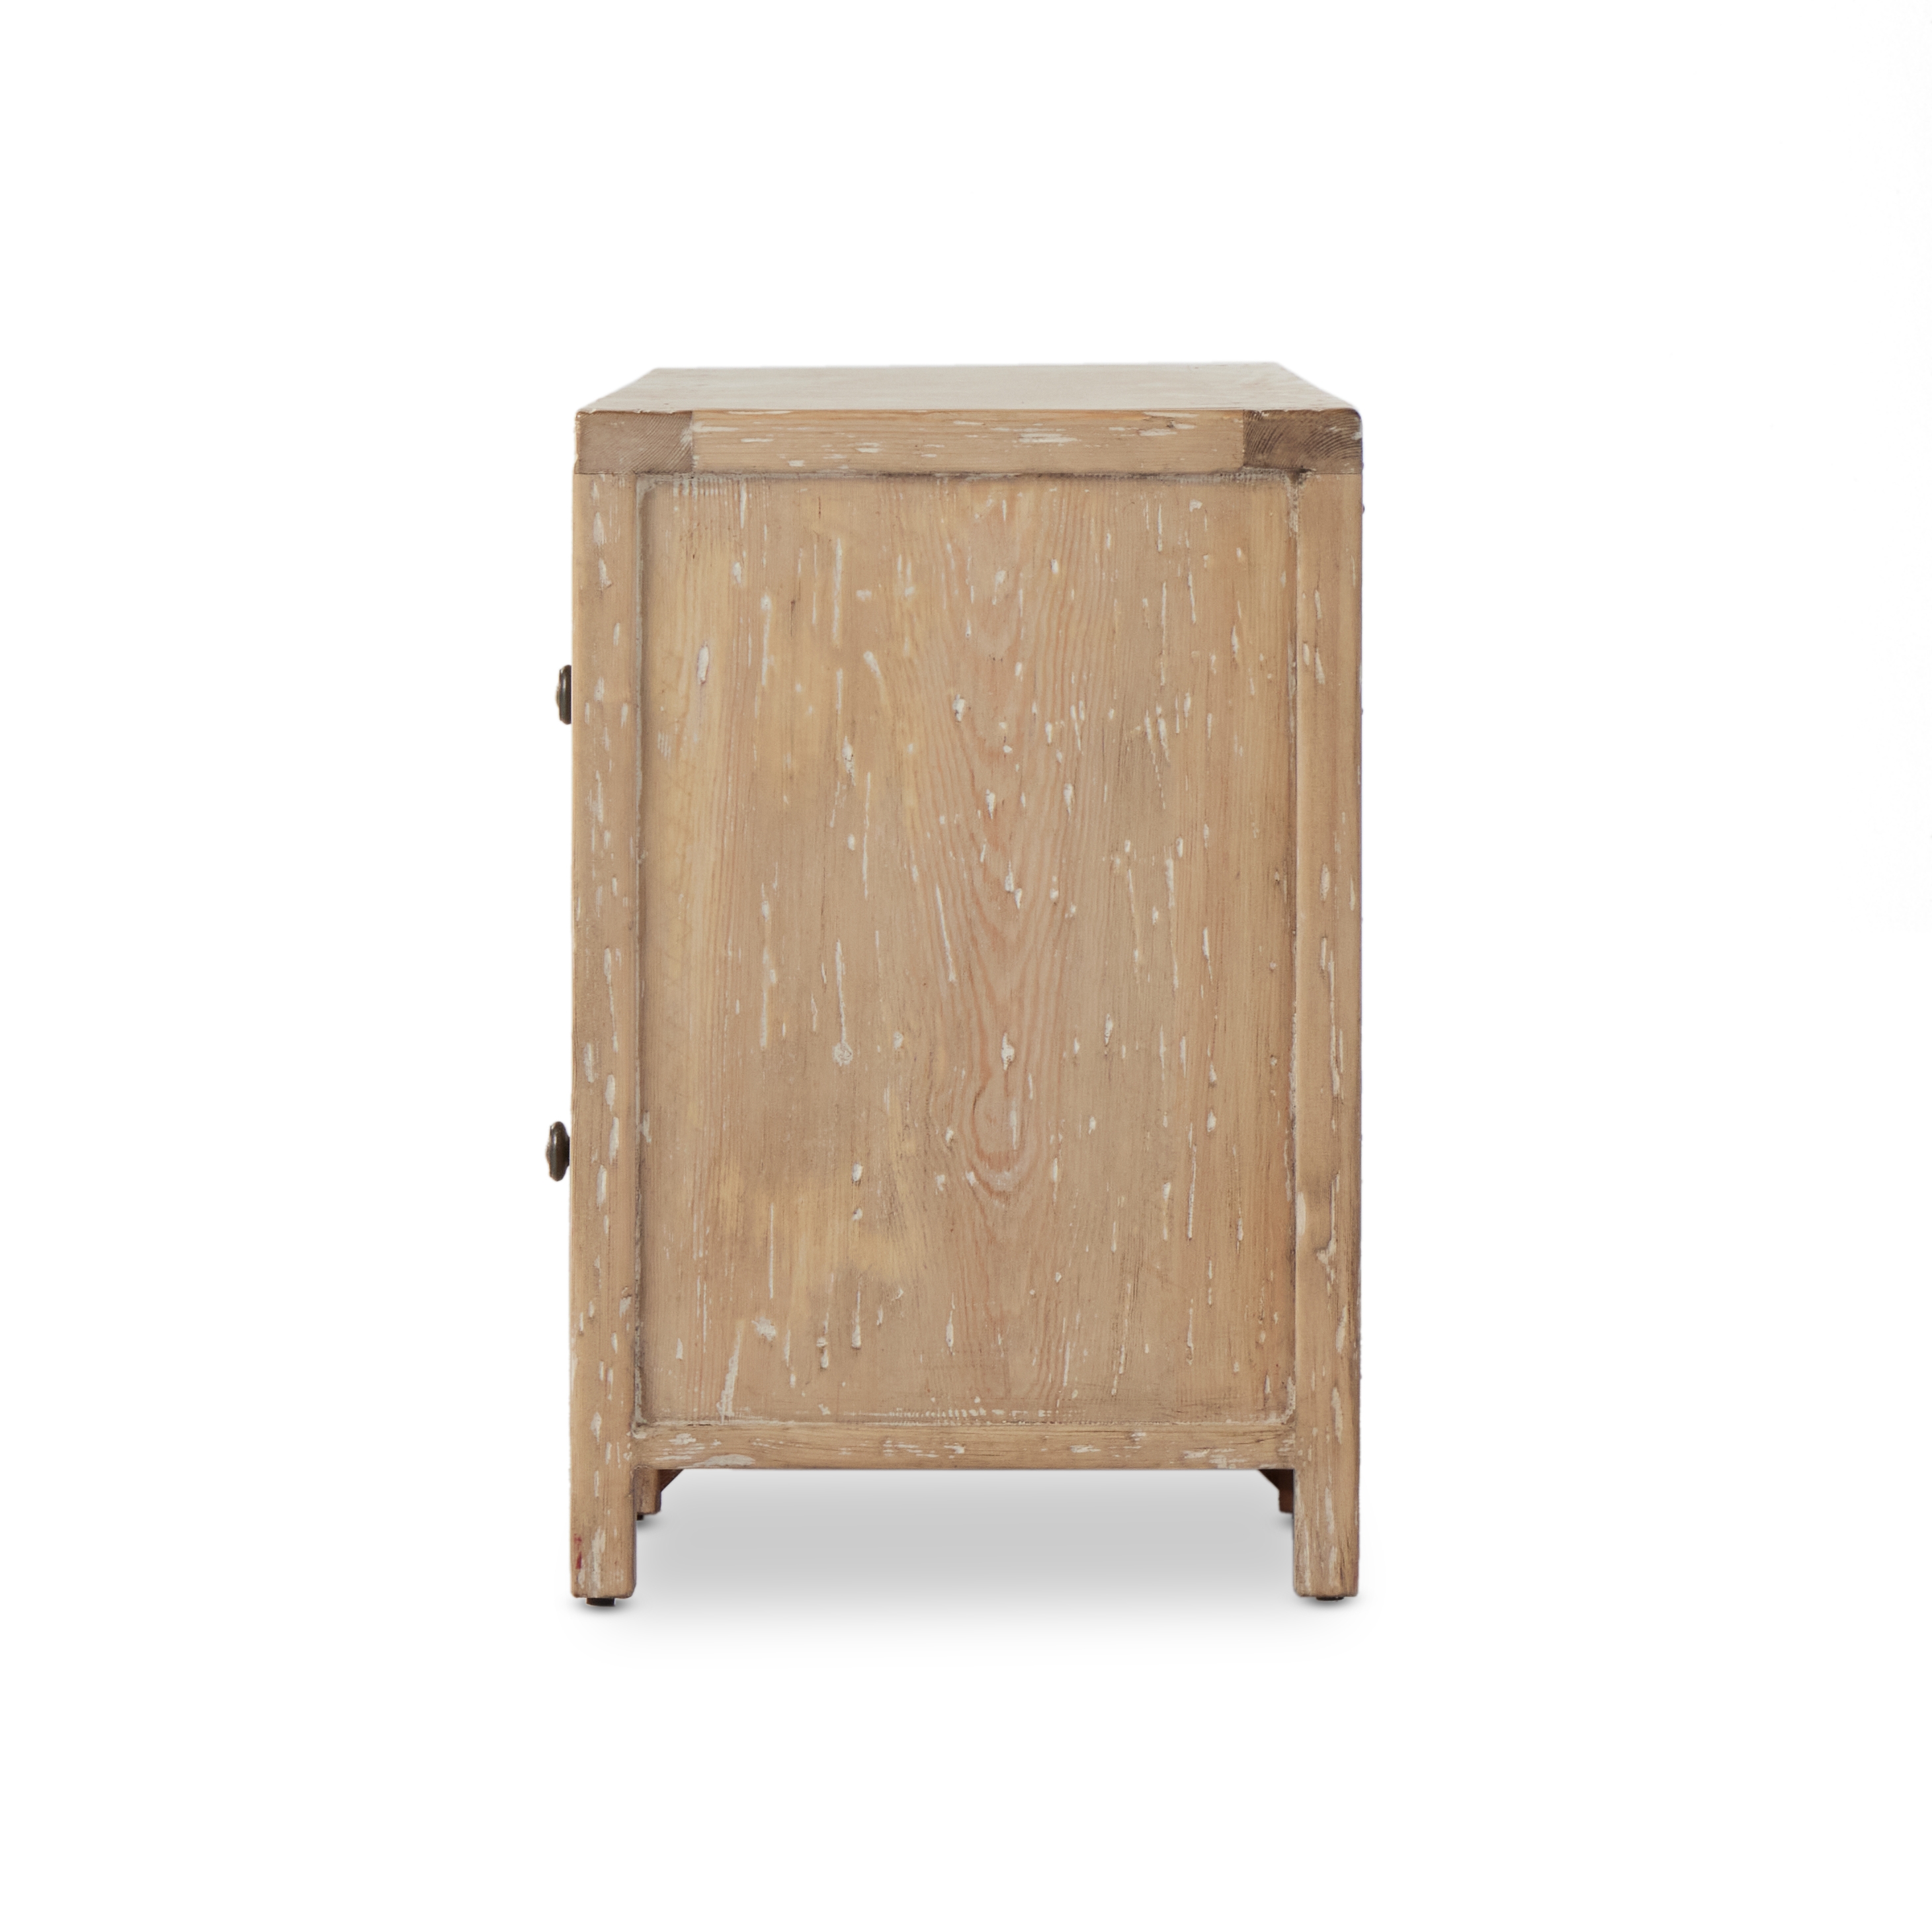 Gaines Media Console-Aged Light Pine - Image 6